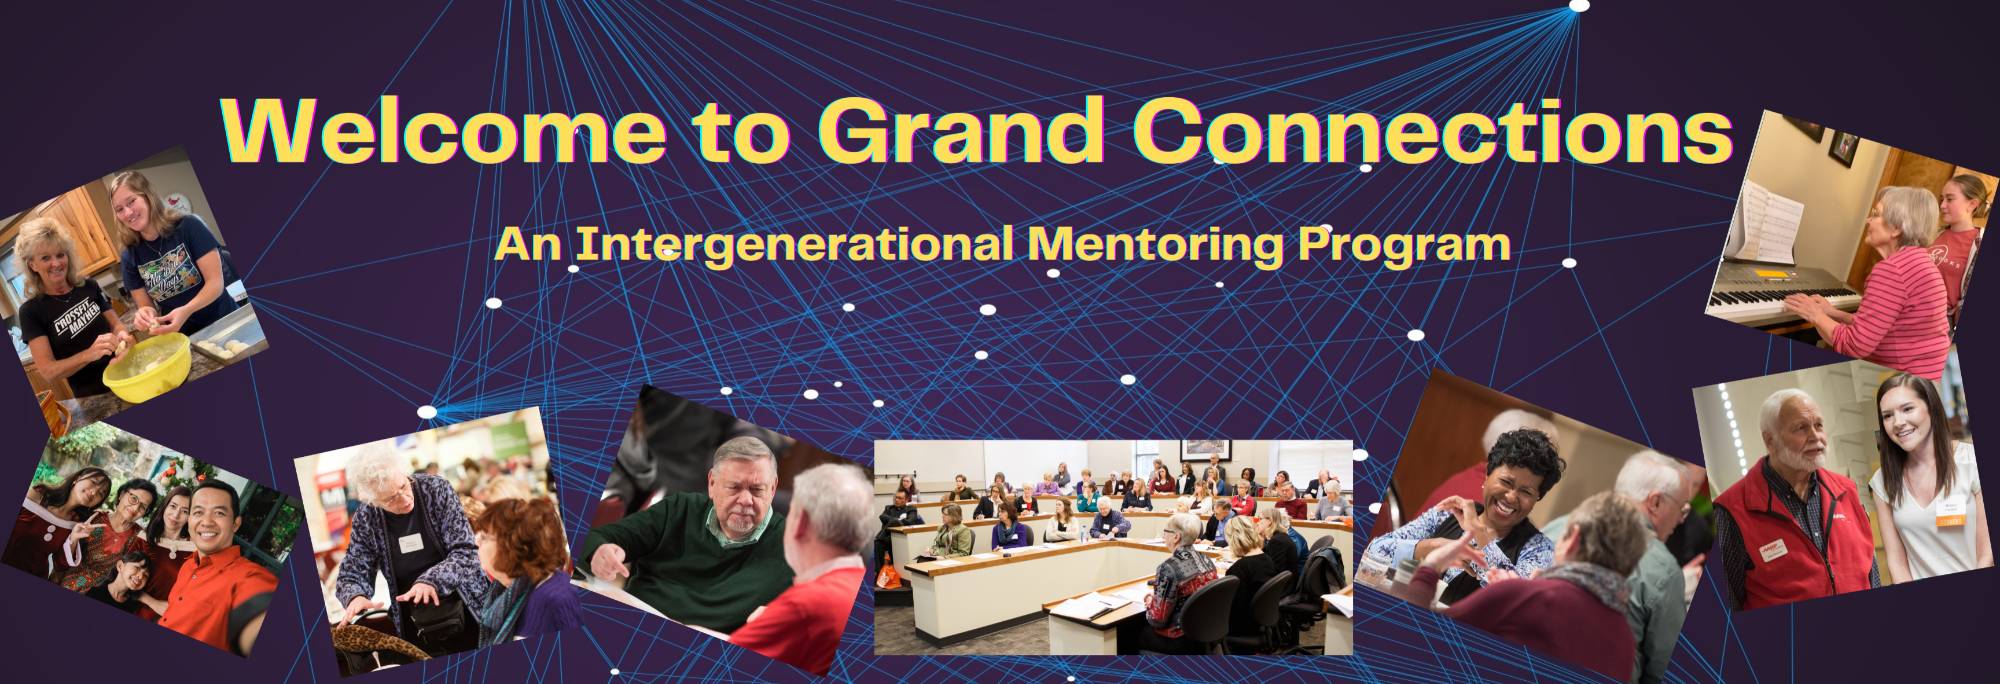 Welcome to Grand Connections - An intergenerational mentoring program